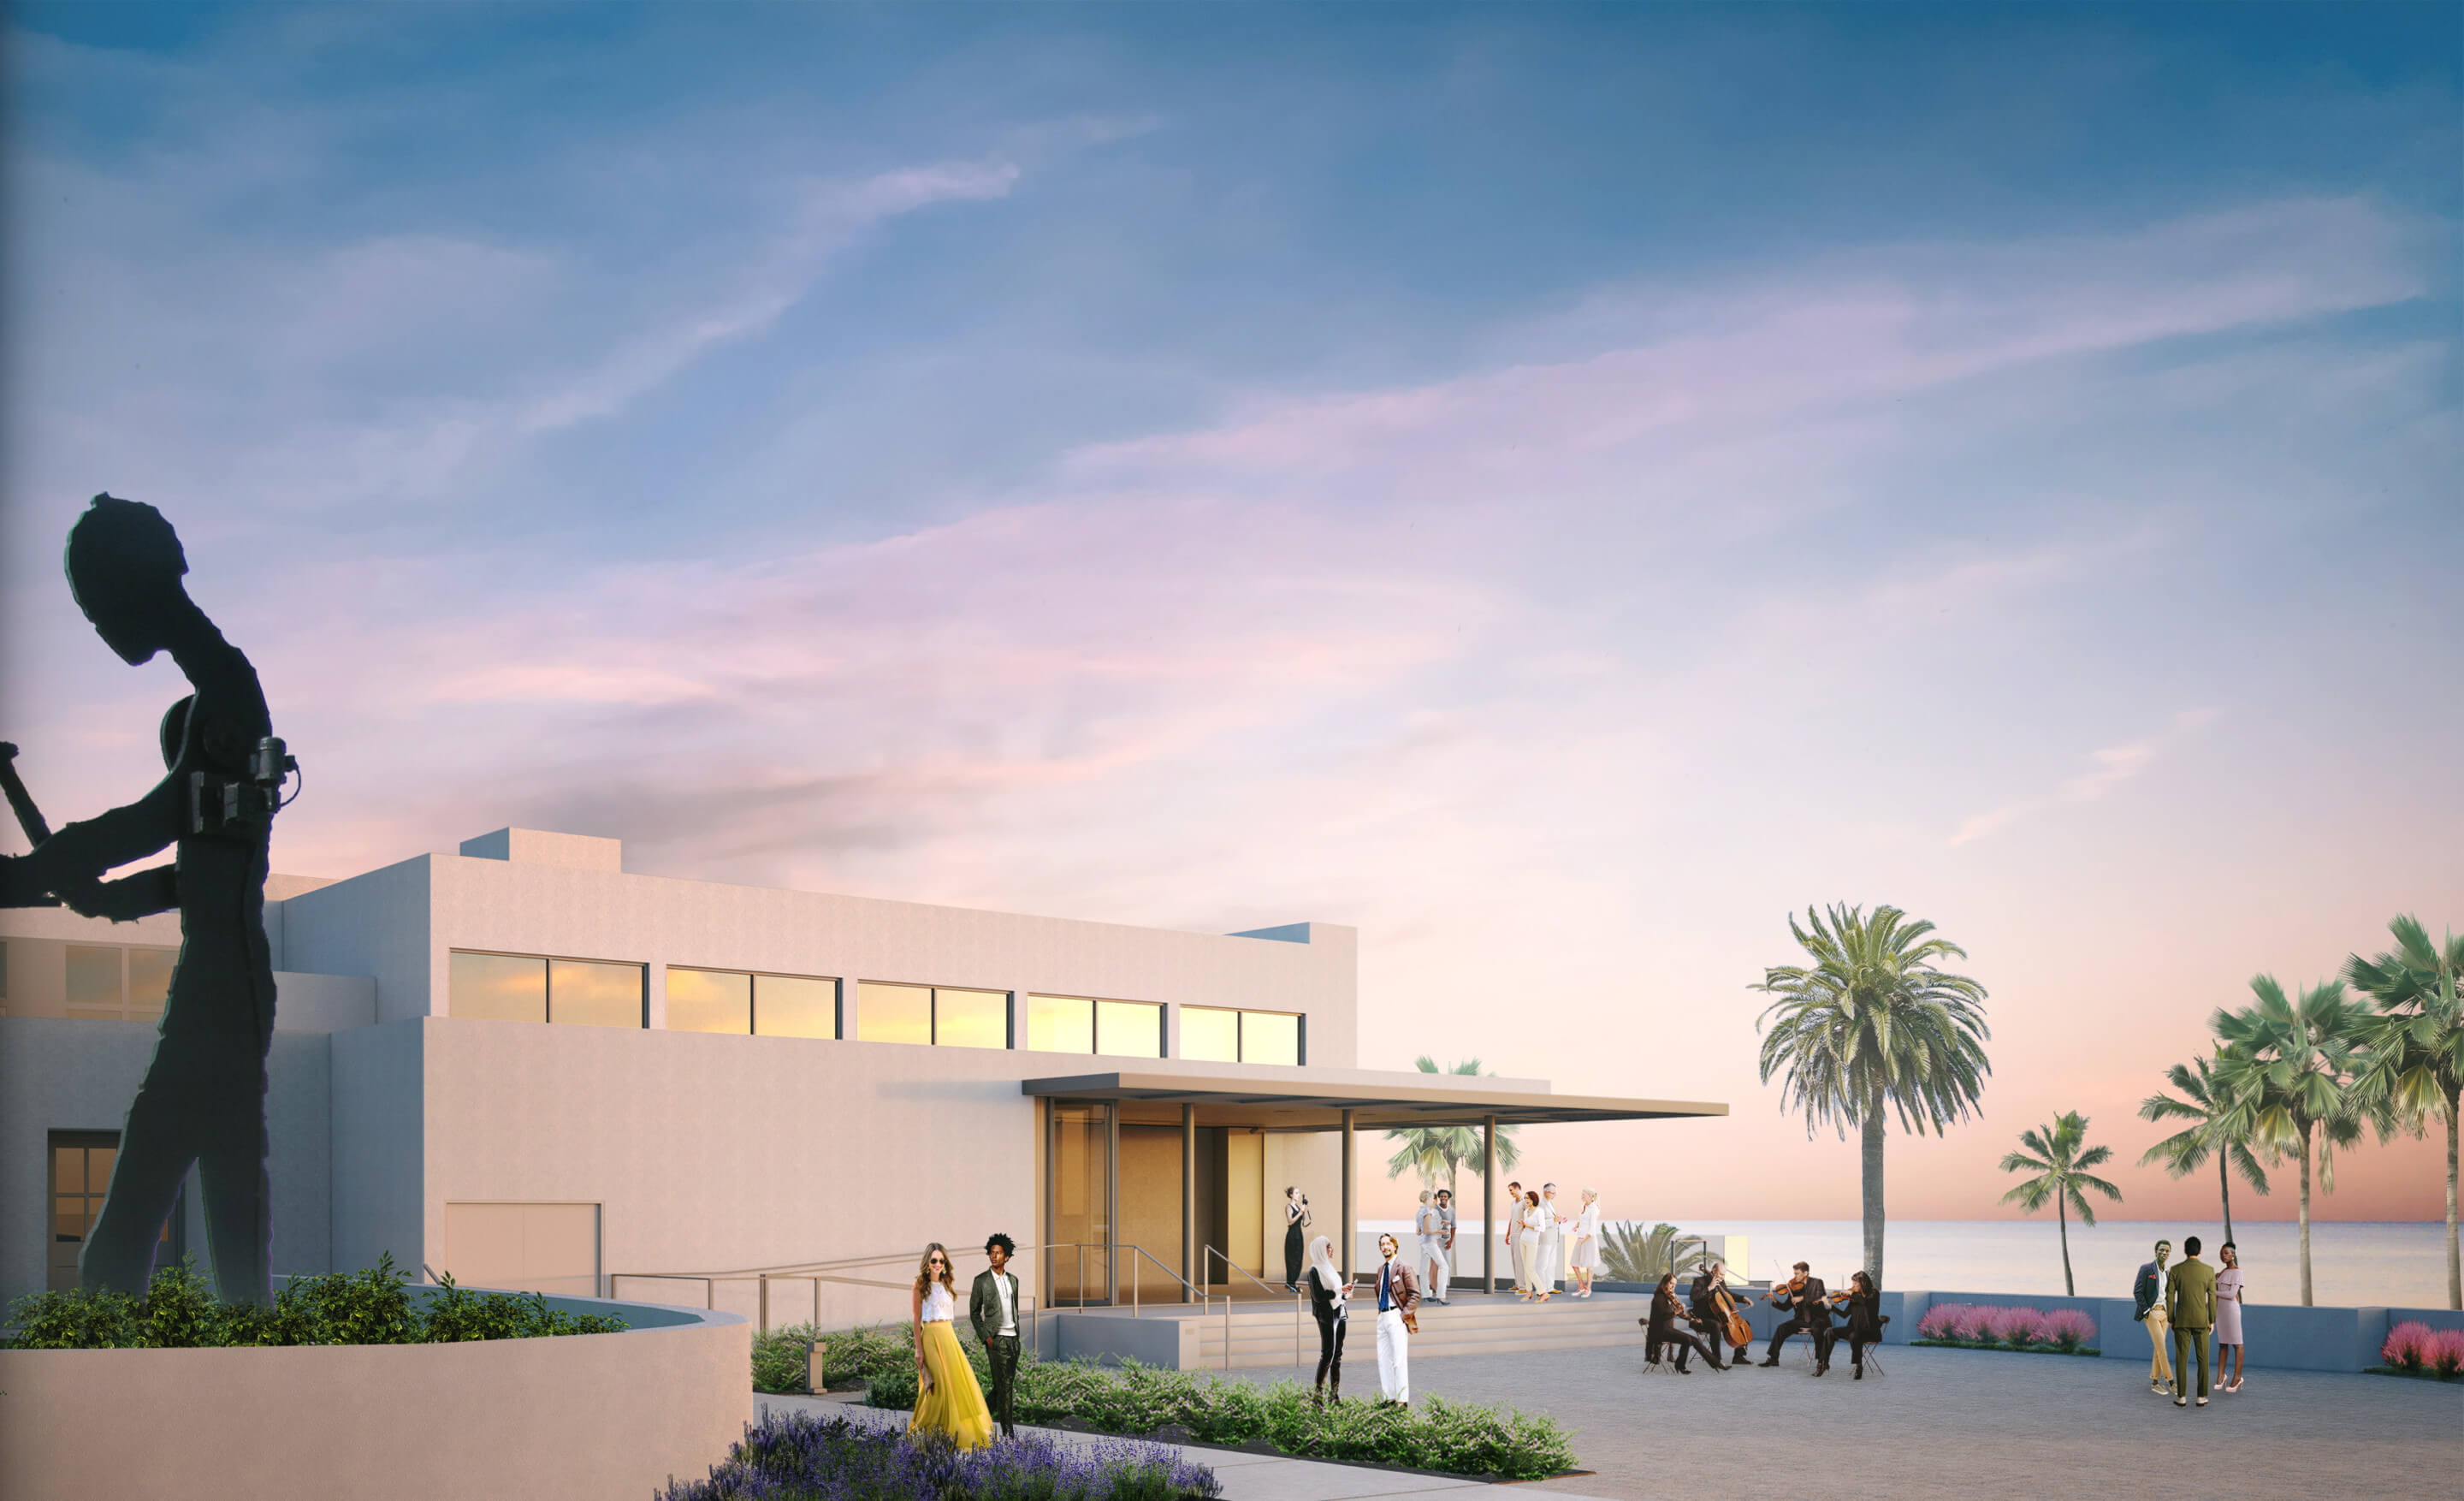 rendering of a san diego museum campus pictured at sunset